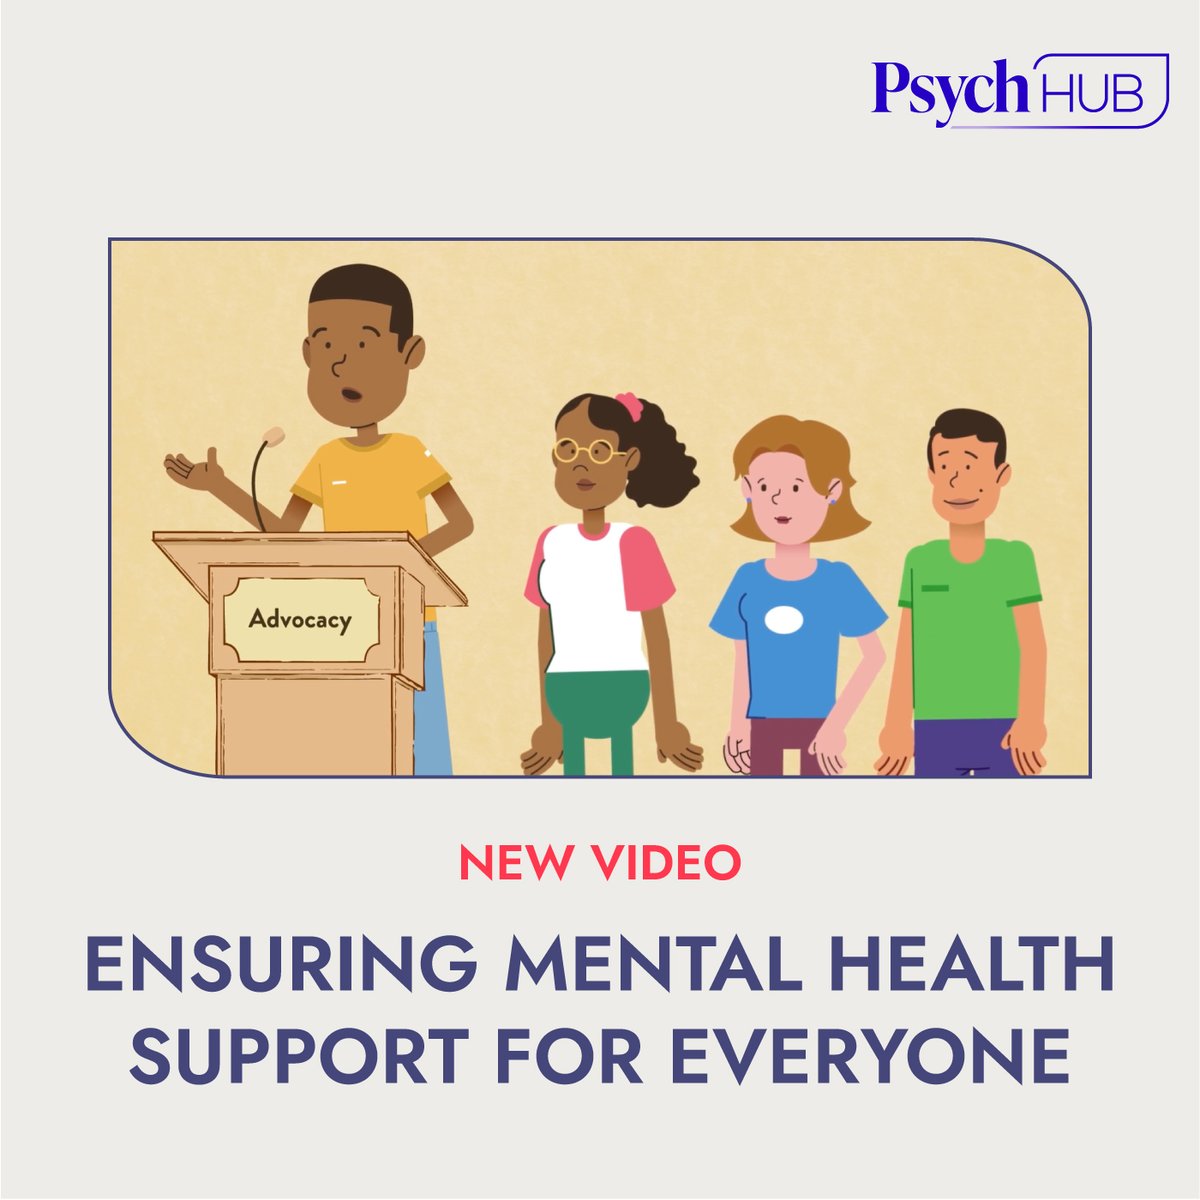 Watch the latest video from Psych Hub and @AFSPnational, 'Ensuring Mental Health Support for Everyone'. You can find it on our YouTube channel in our playlist for BIPOC teen mental health. bit.ly/41QTPmC Learn more about mental health equity at afsp.org/advocacy.